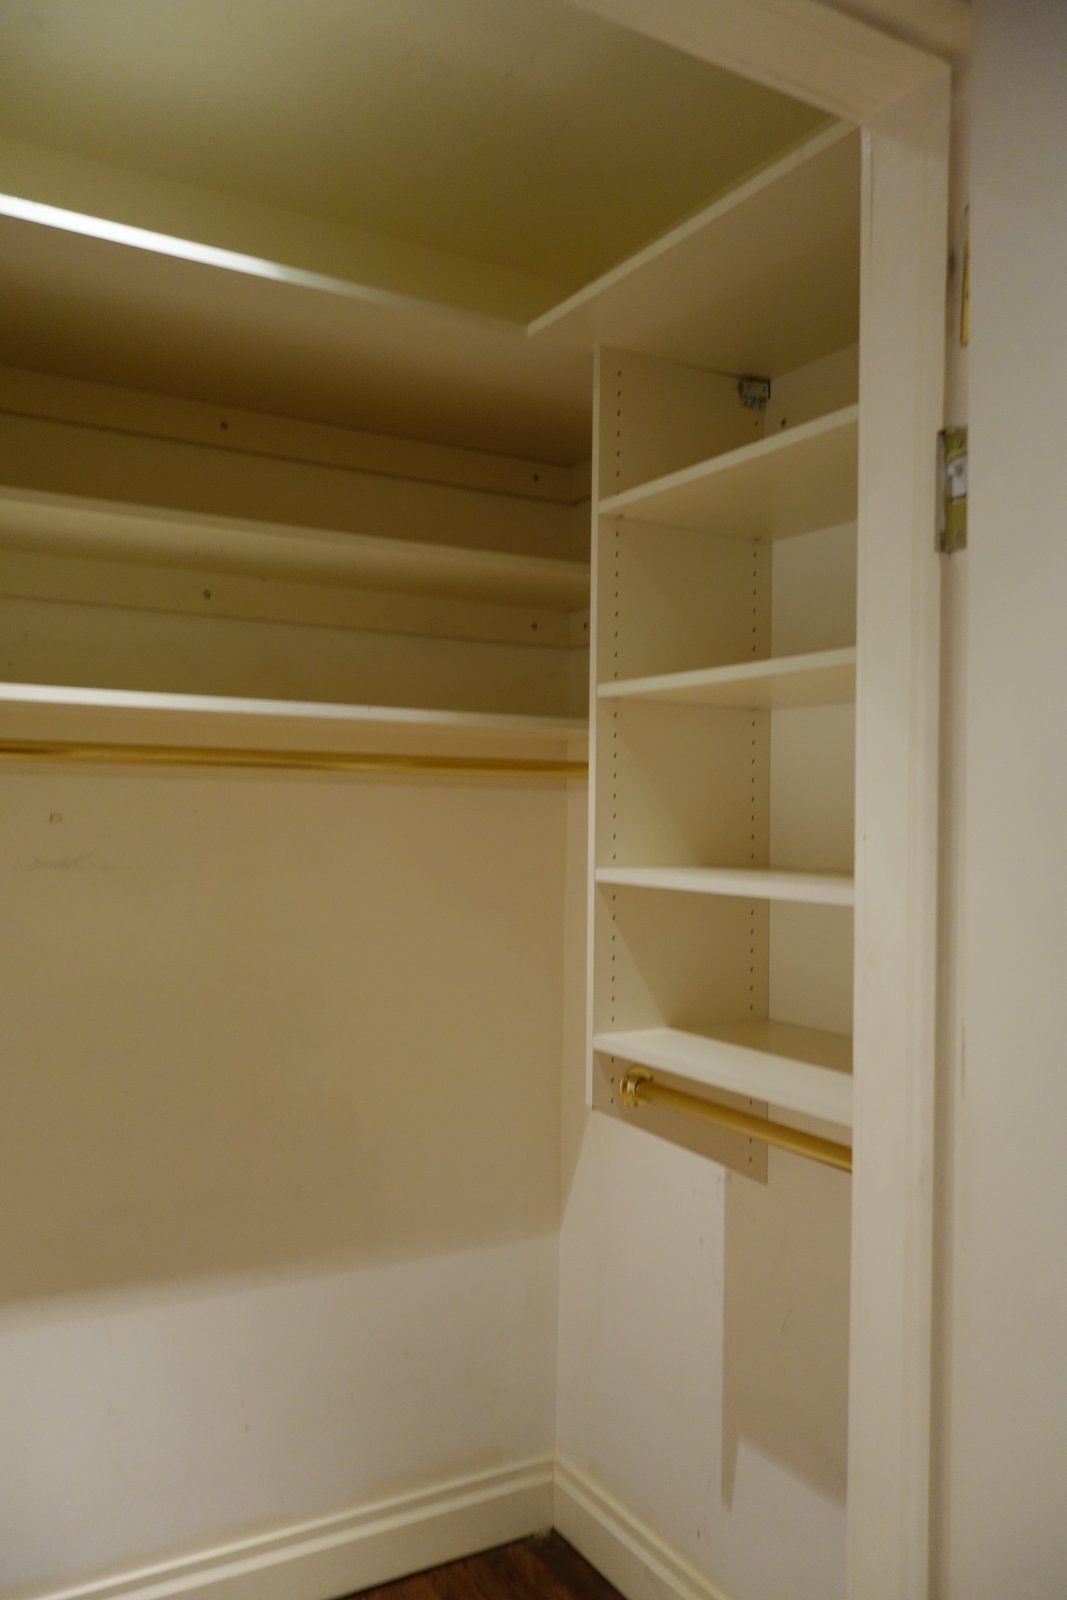 Other sections of the apartment have also been repurposed, like this closet space for example